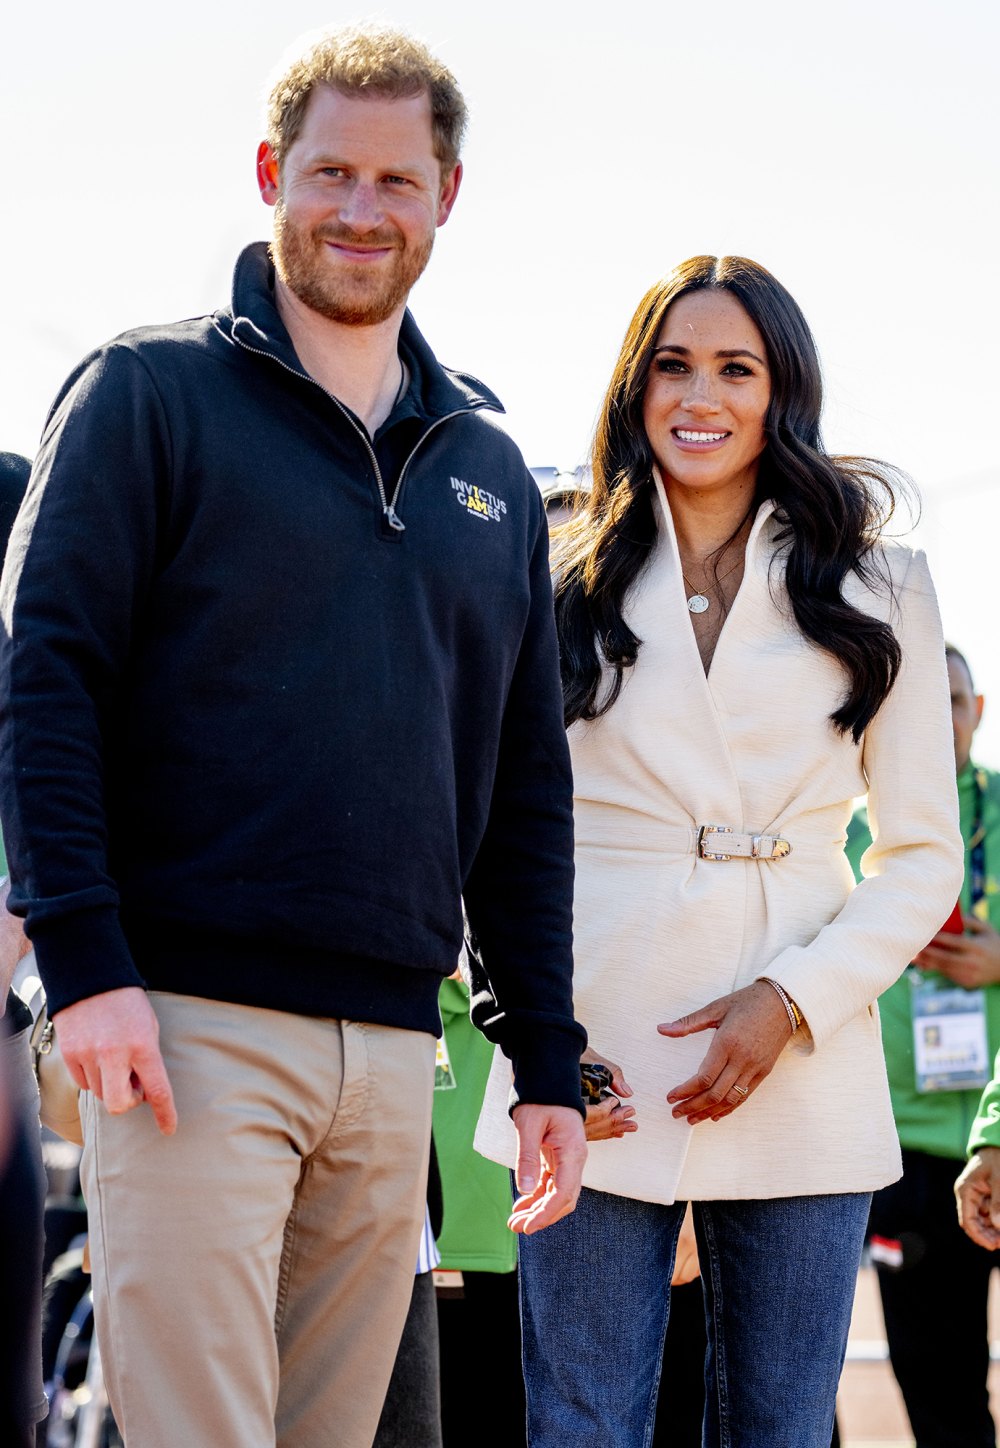 Dayani, 40, was first hired by Archewell in September 2021 as both the company's president and chief operating officer, not long after Harry and Meghan welcomed their daughter Lilibet that June.